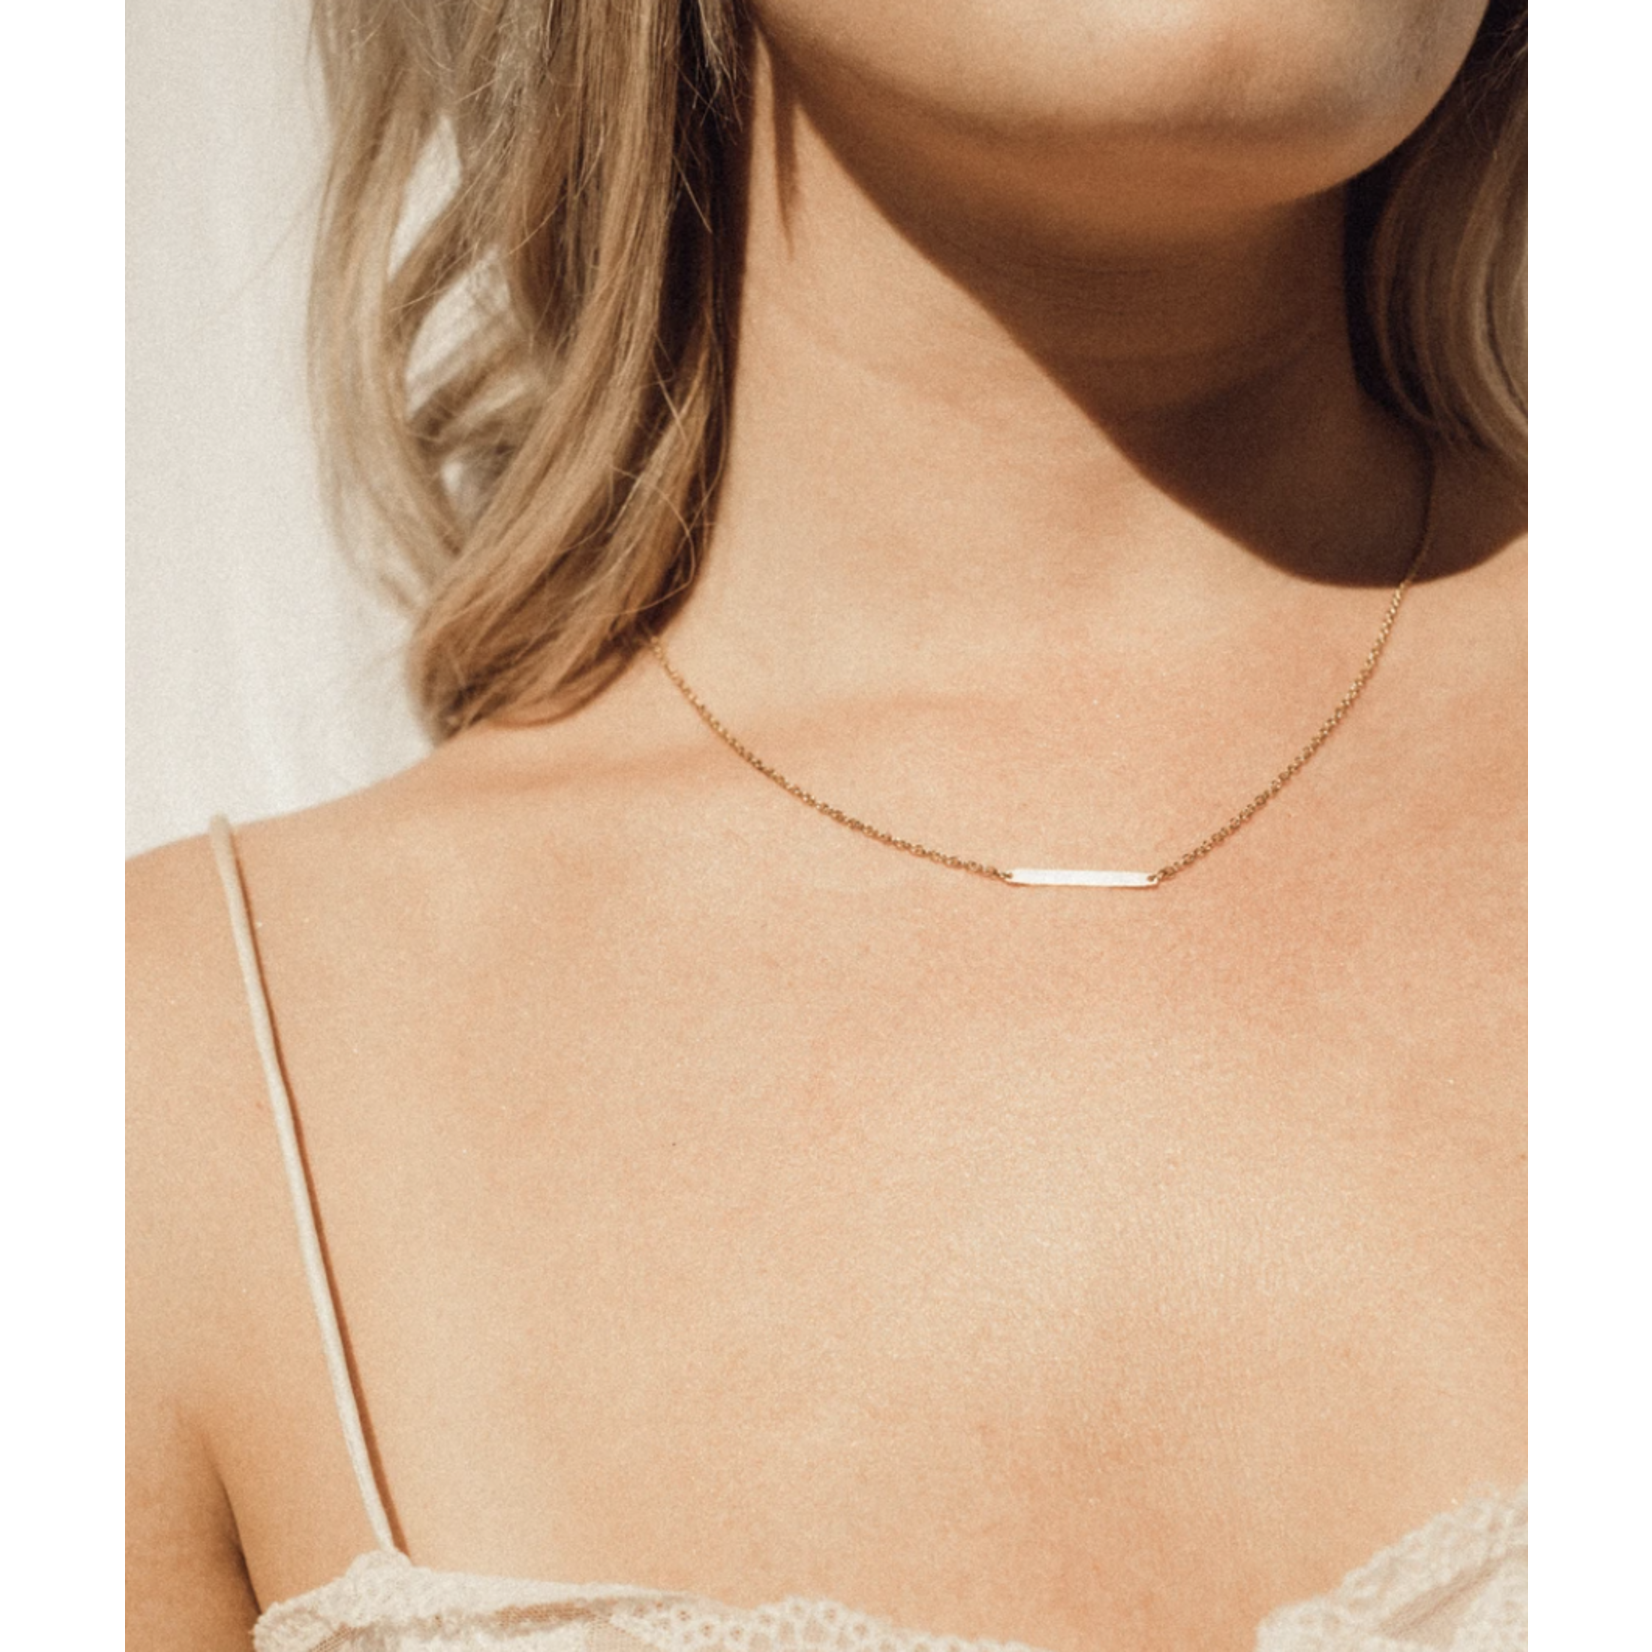 Lumiela 'Simple is Beautiful' Gold-Plated Necklace